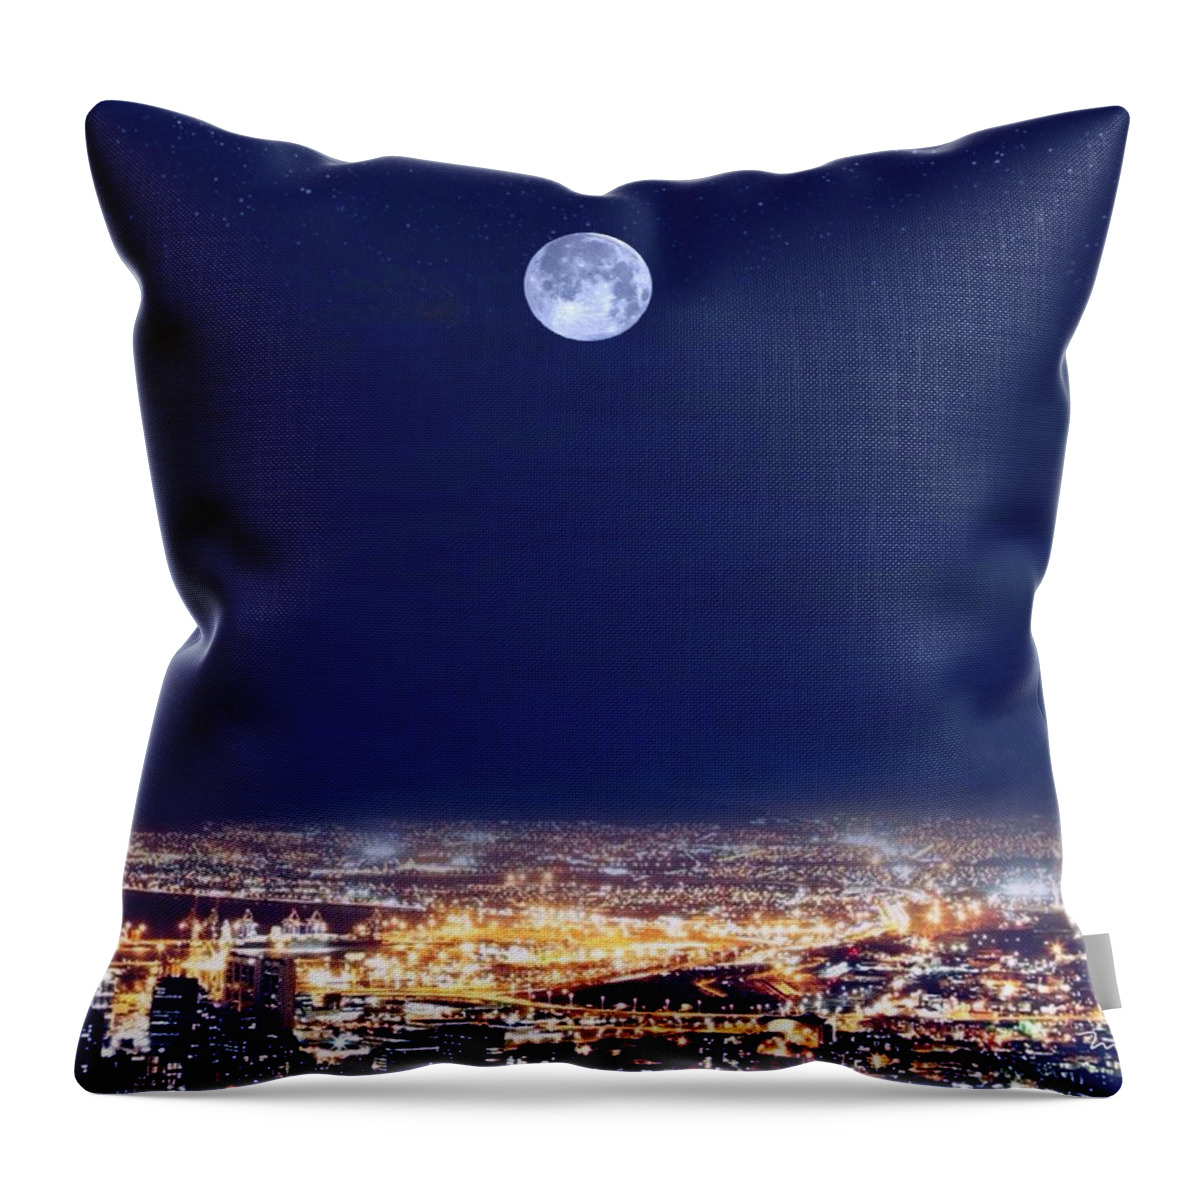 bright Lights Big City Throw Pillow featuring the digital art Bright Lights Big City by Mark Taylor